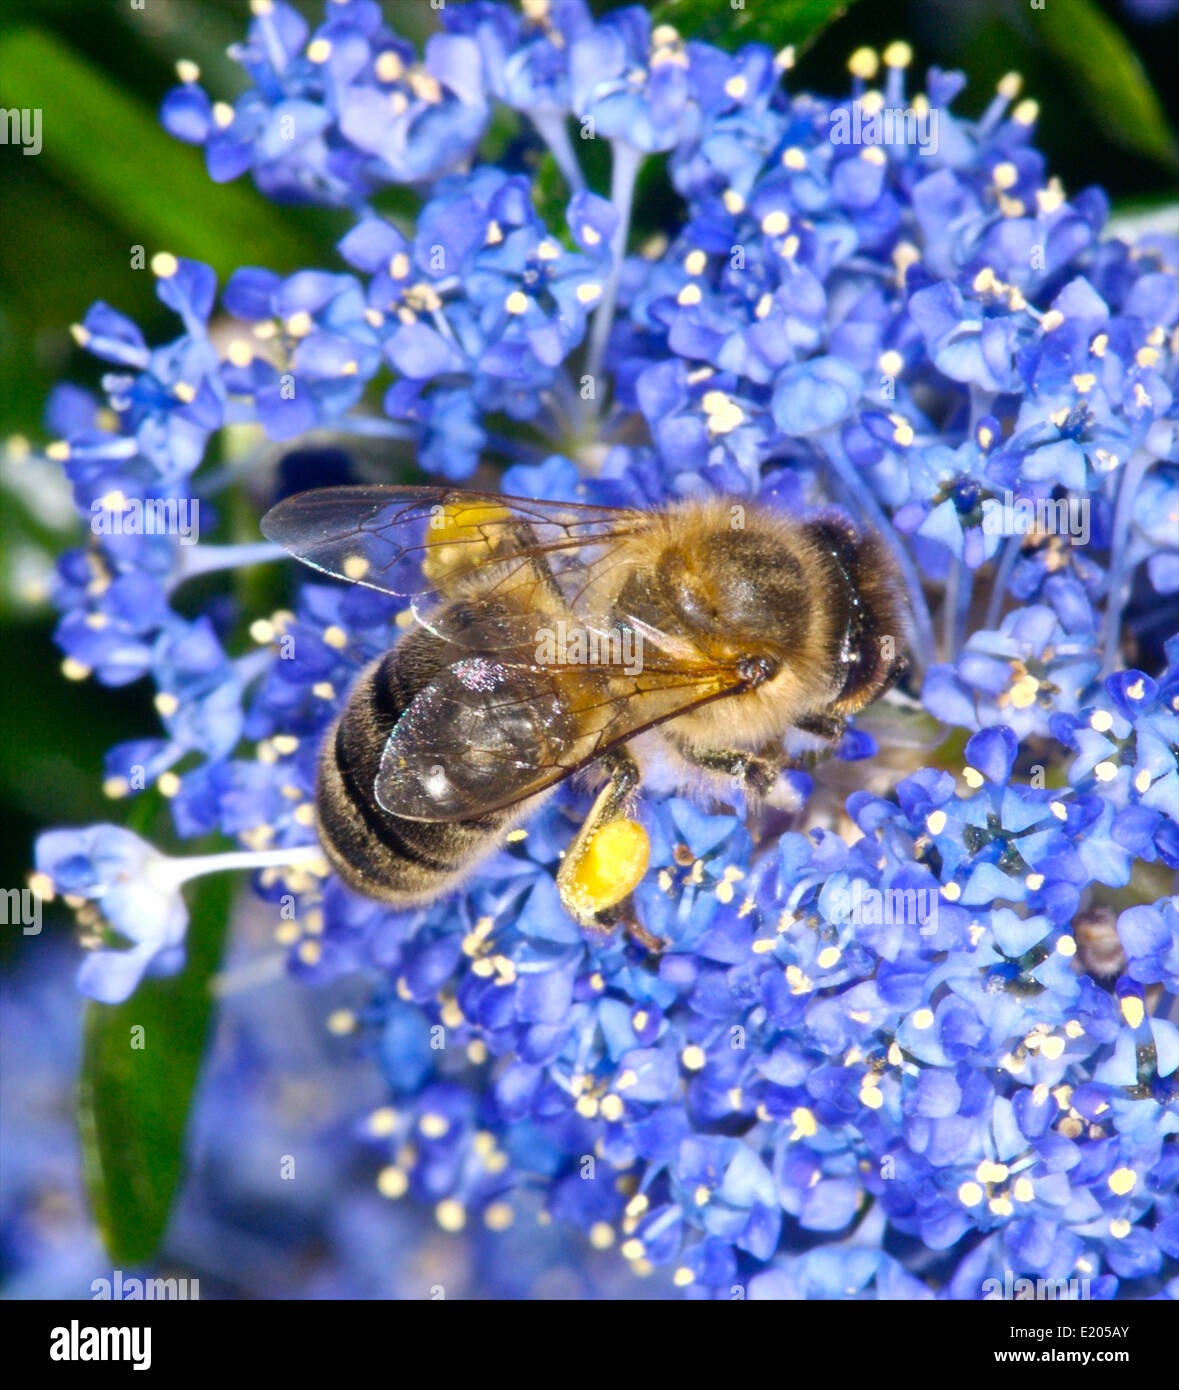 Apis mellifera or Western/ European honey bee gathering nectar and pollen in the early morning sunshine Stock Photo